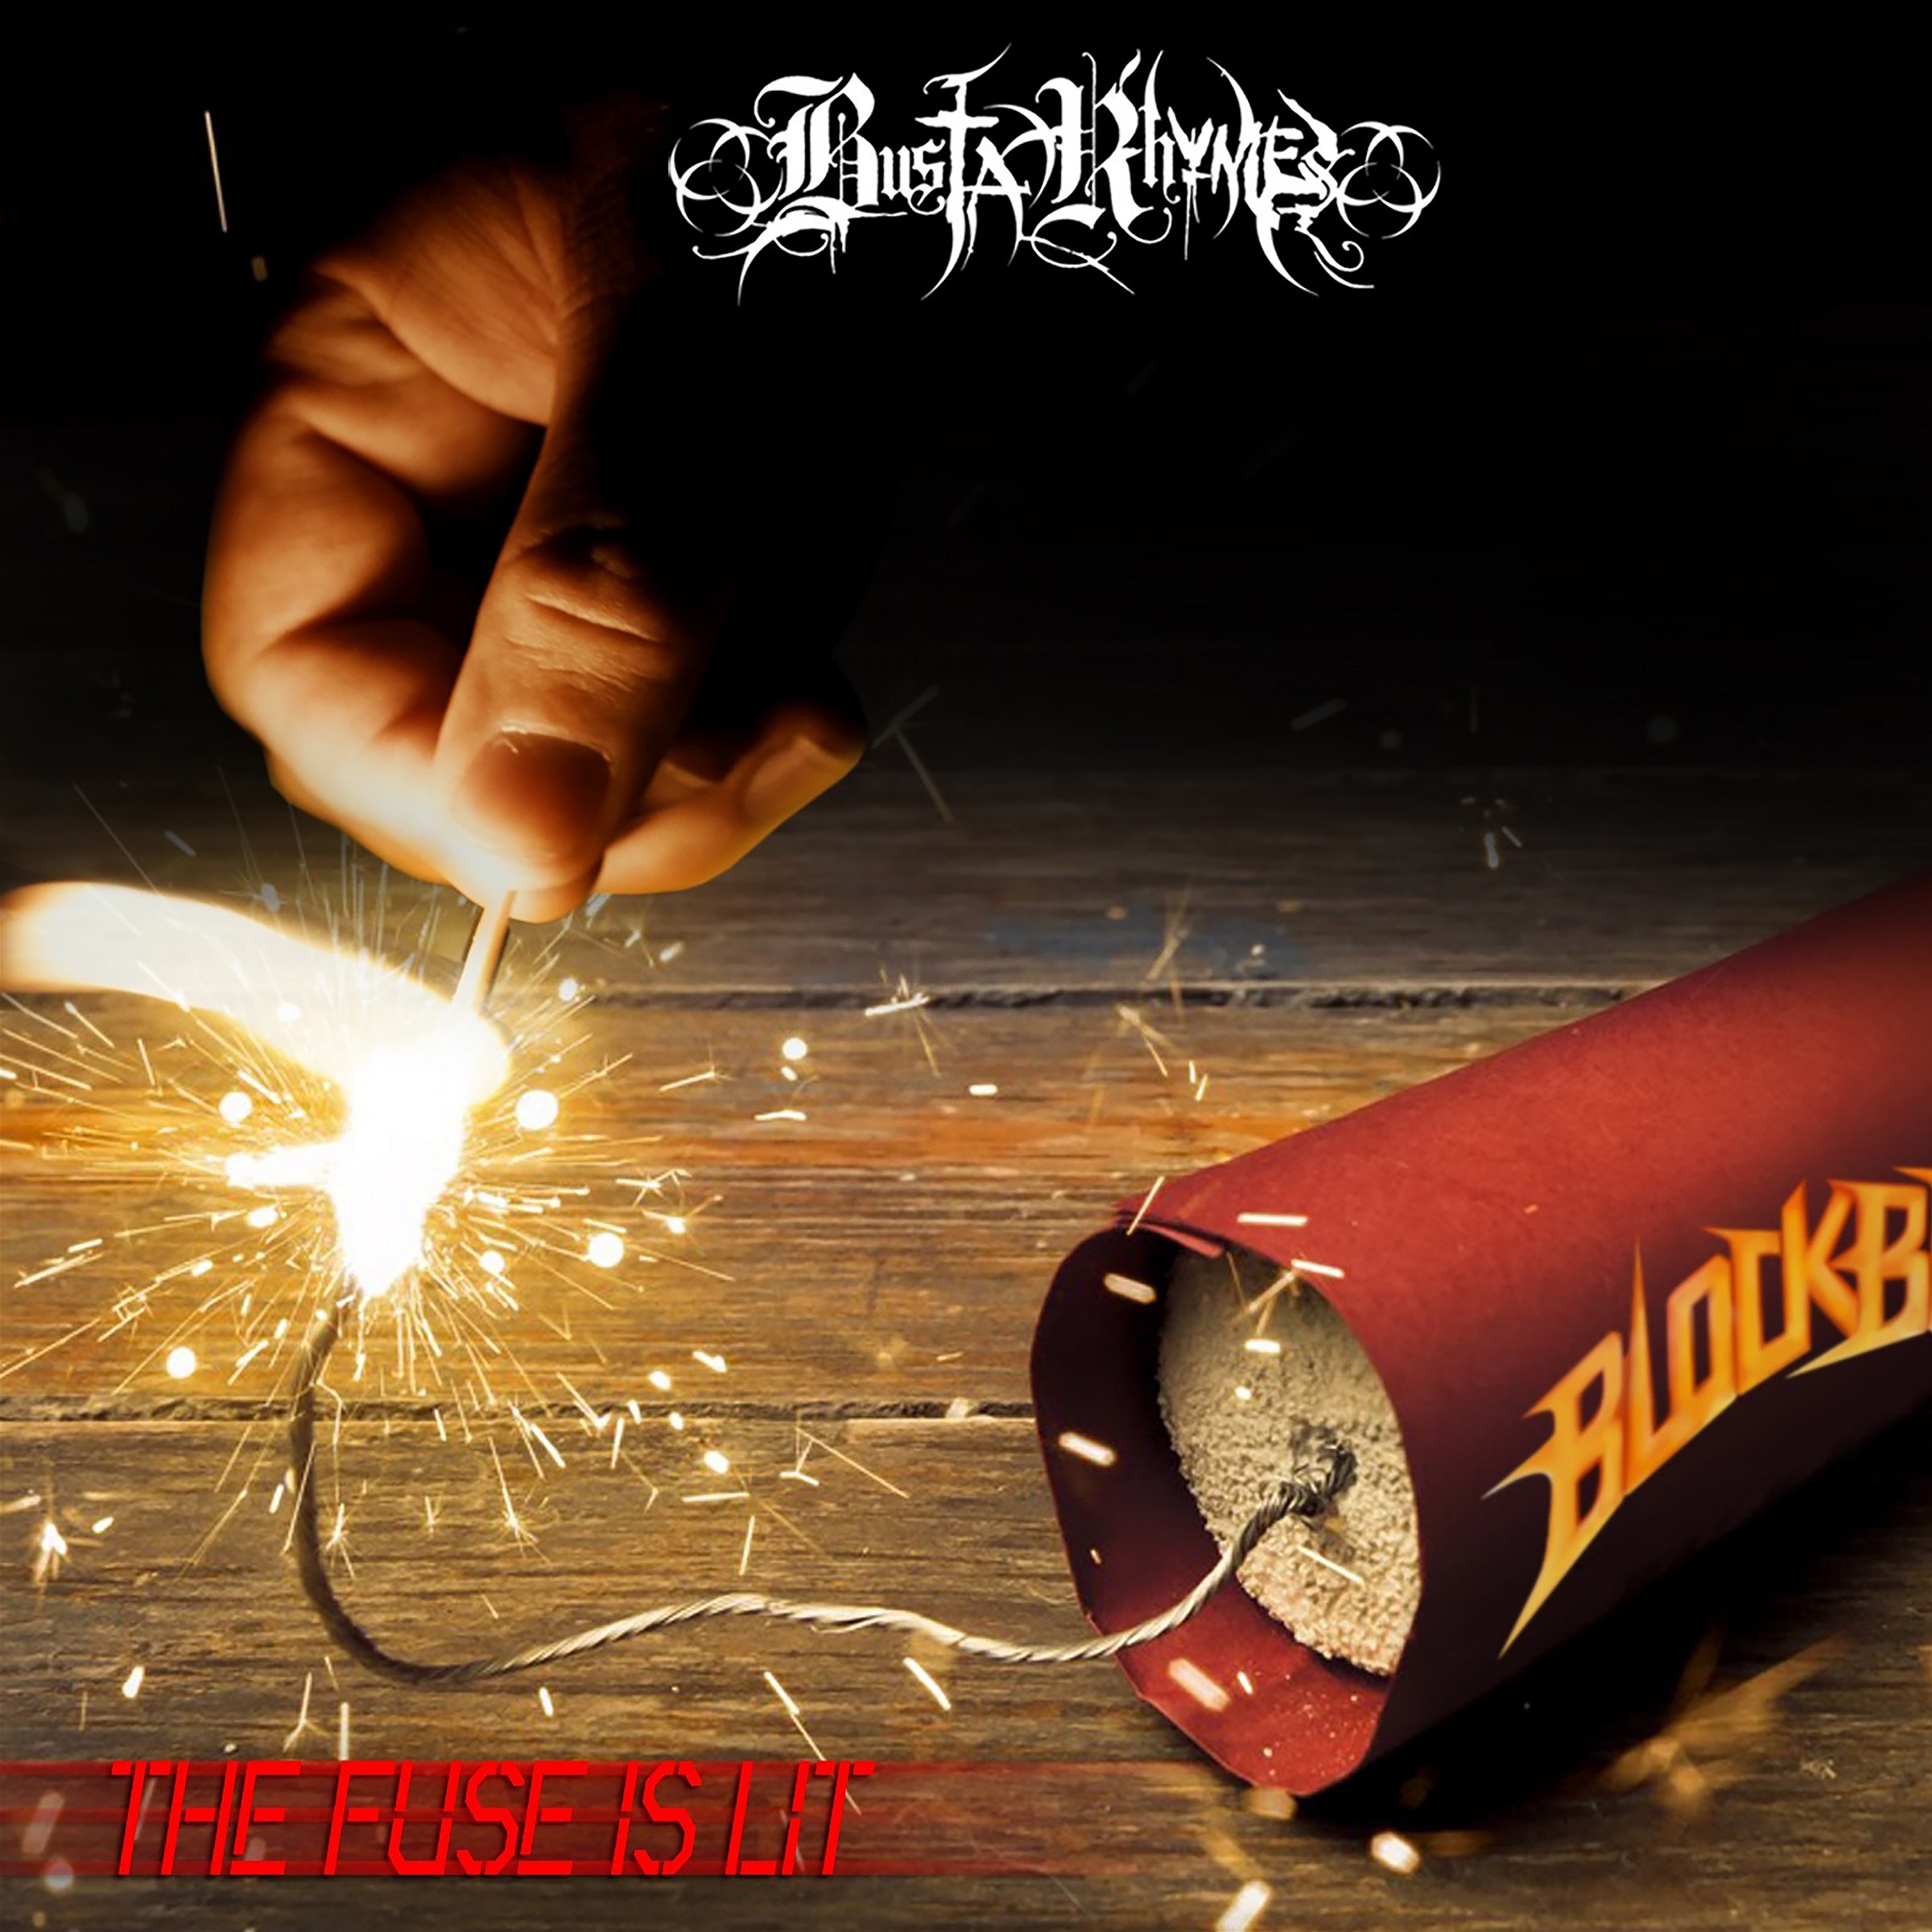 Busta Rhymes (The Fuse Is Lit) Album Cover POSTER - Lost Posters